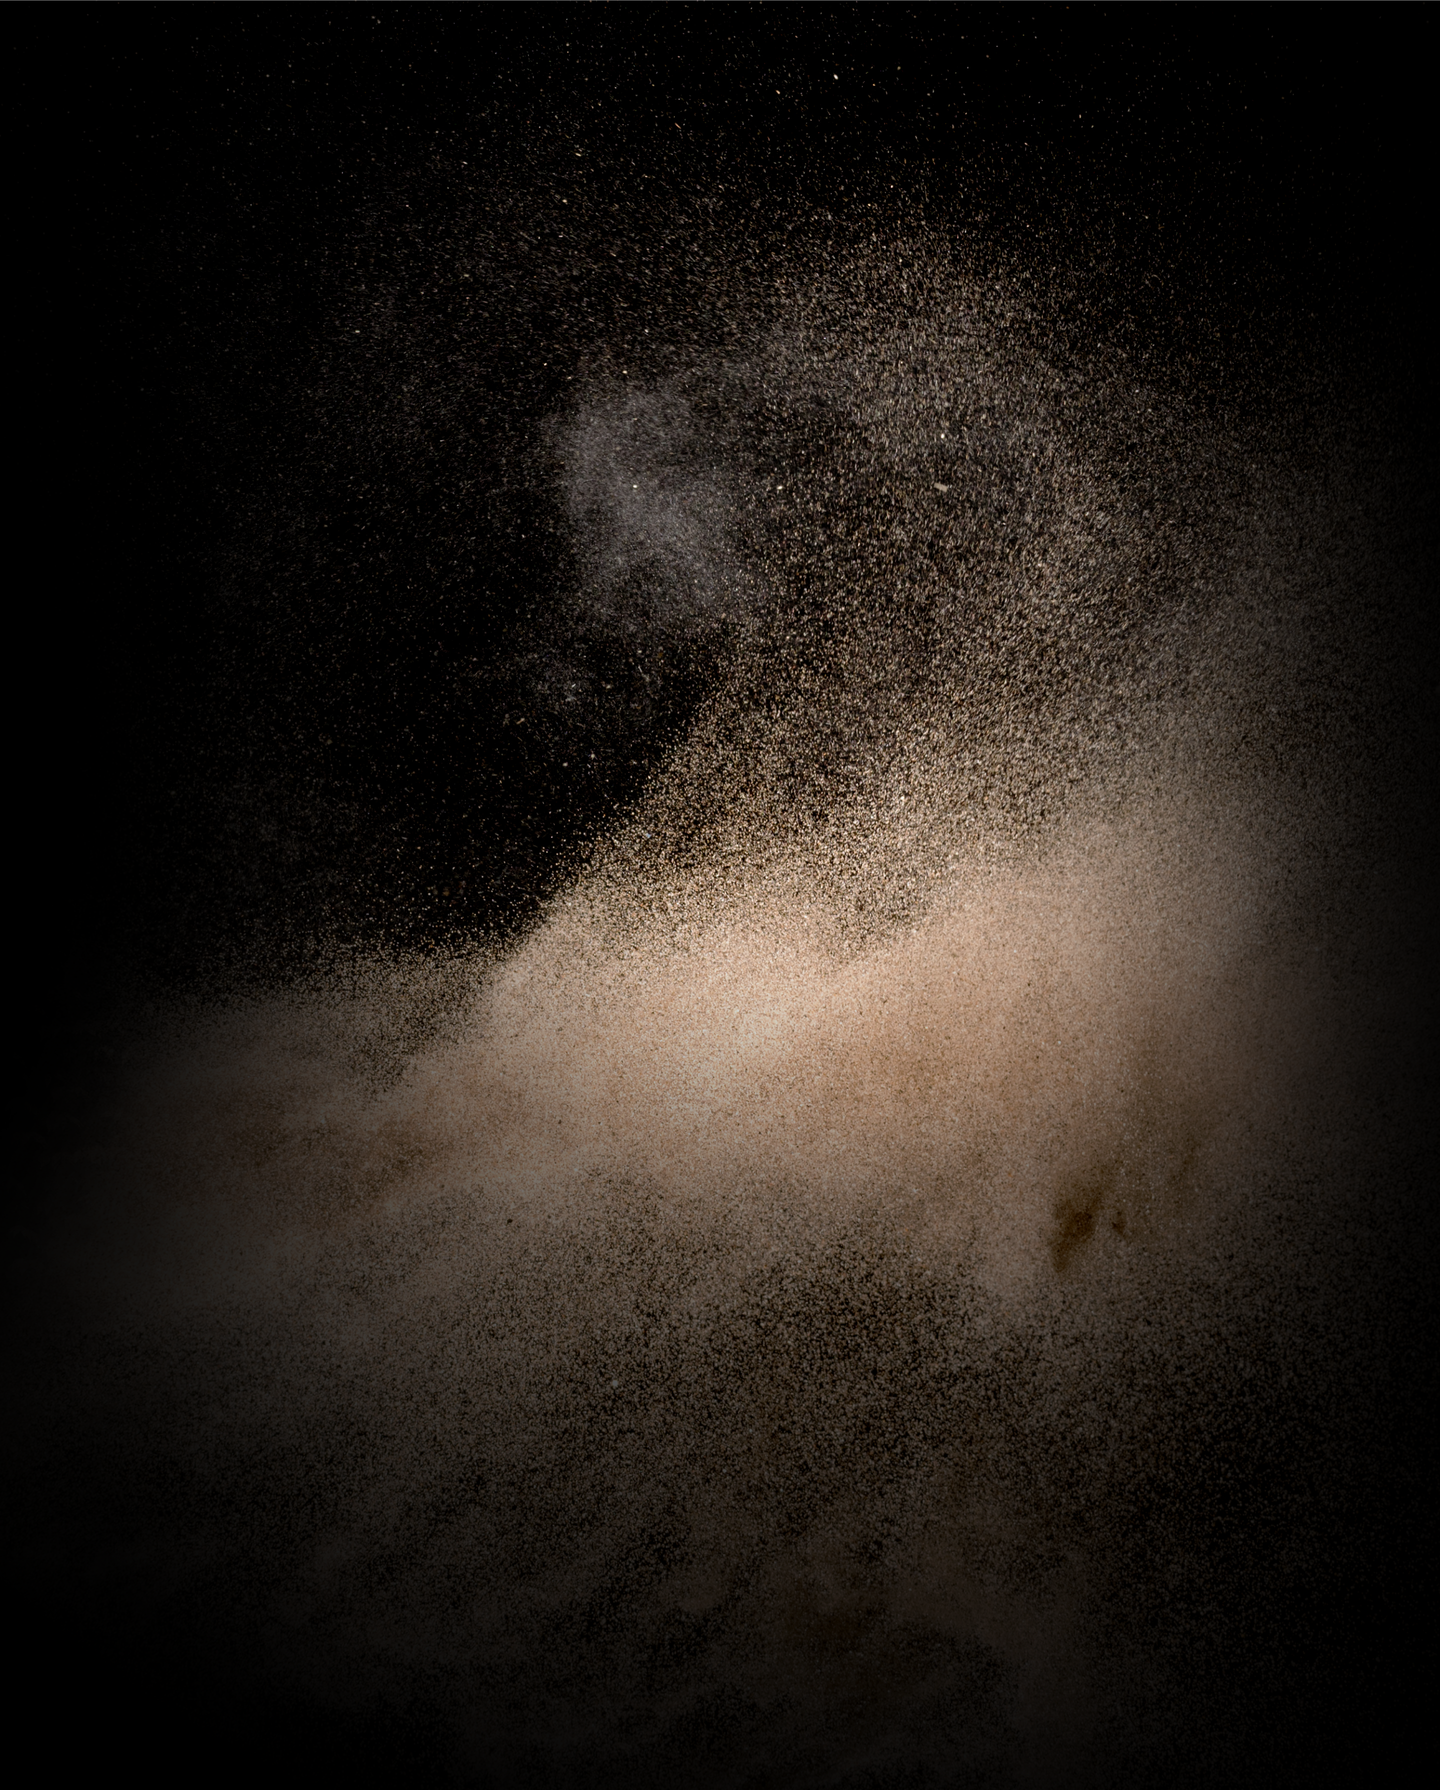 background element of some dust